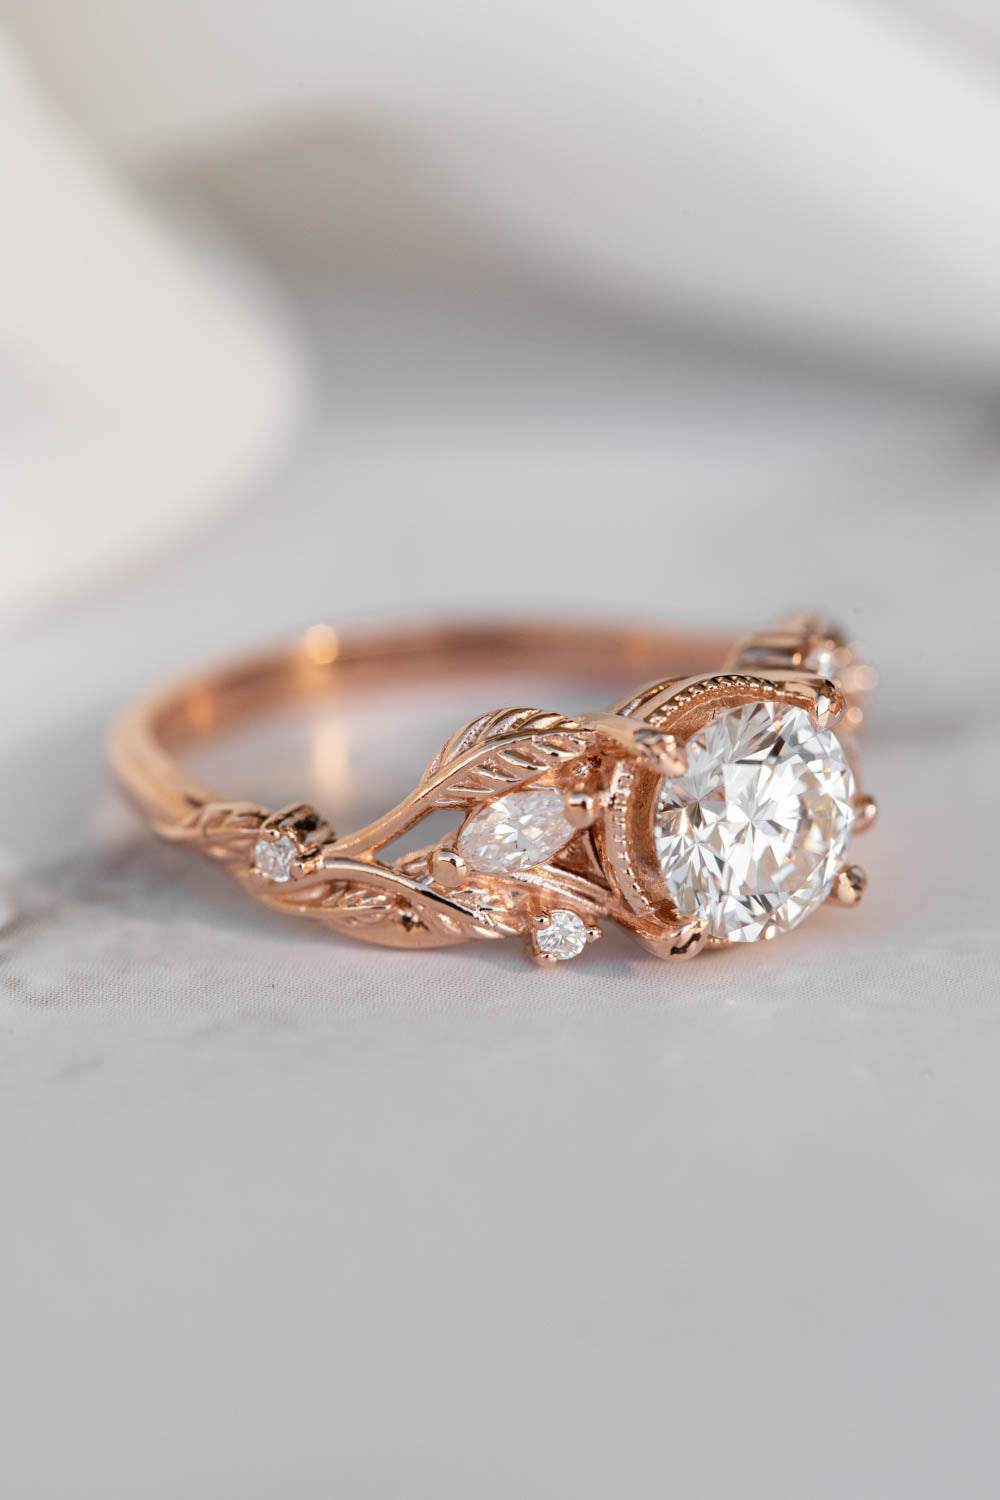 antique rose gold engagement rings